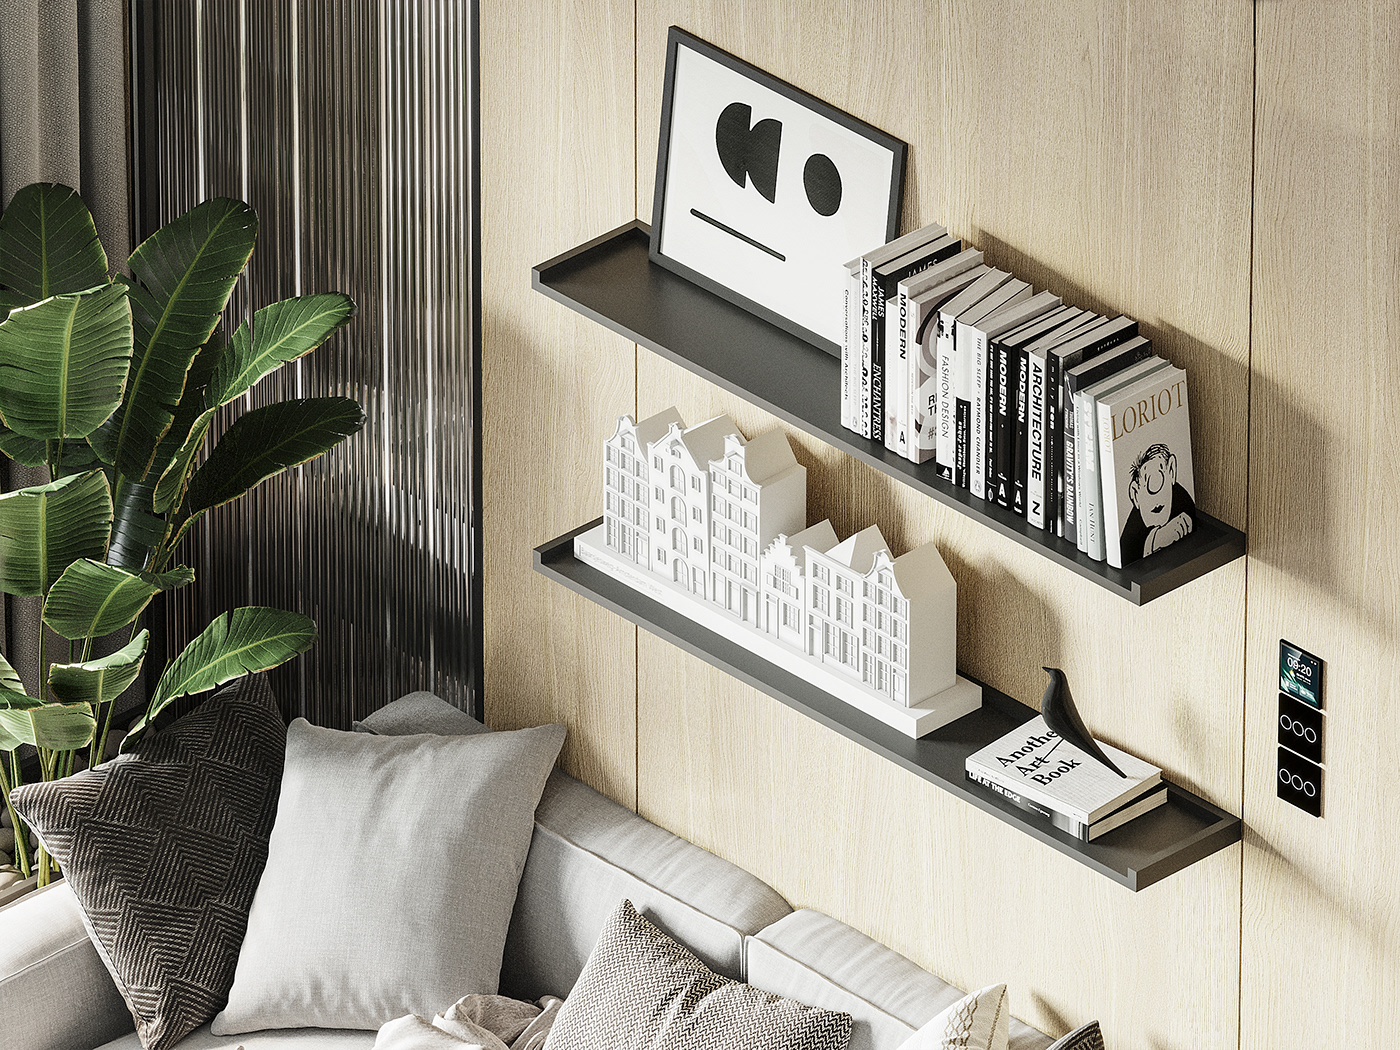 This corner is decorated with models and books in white and black as the main color.